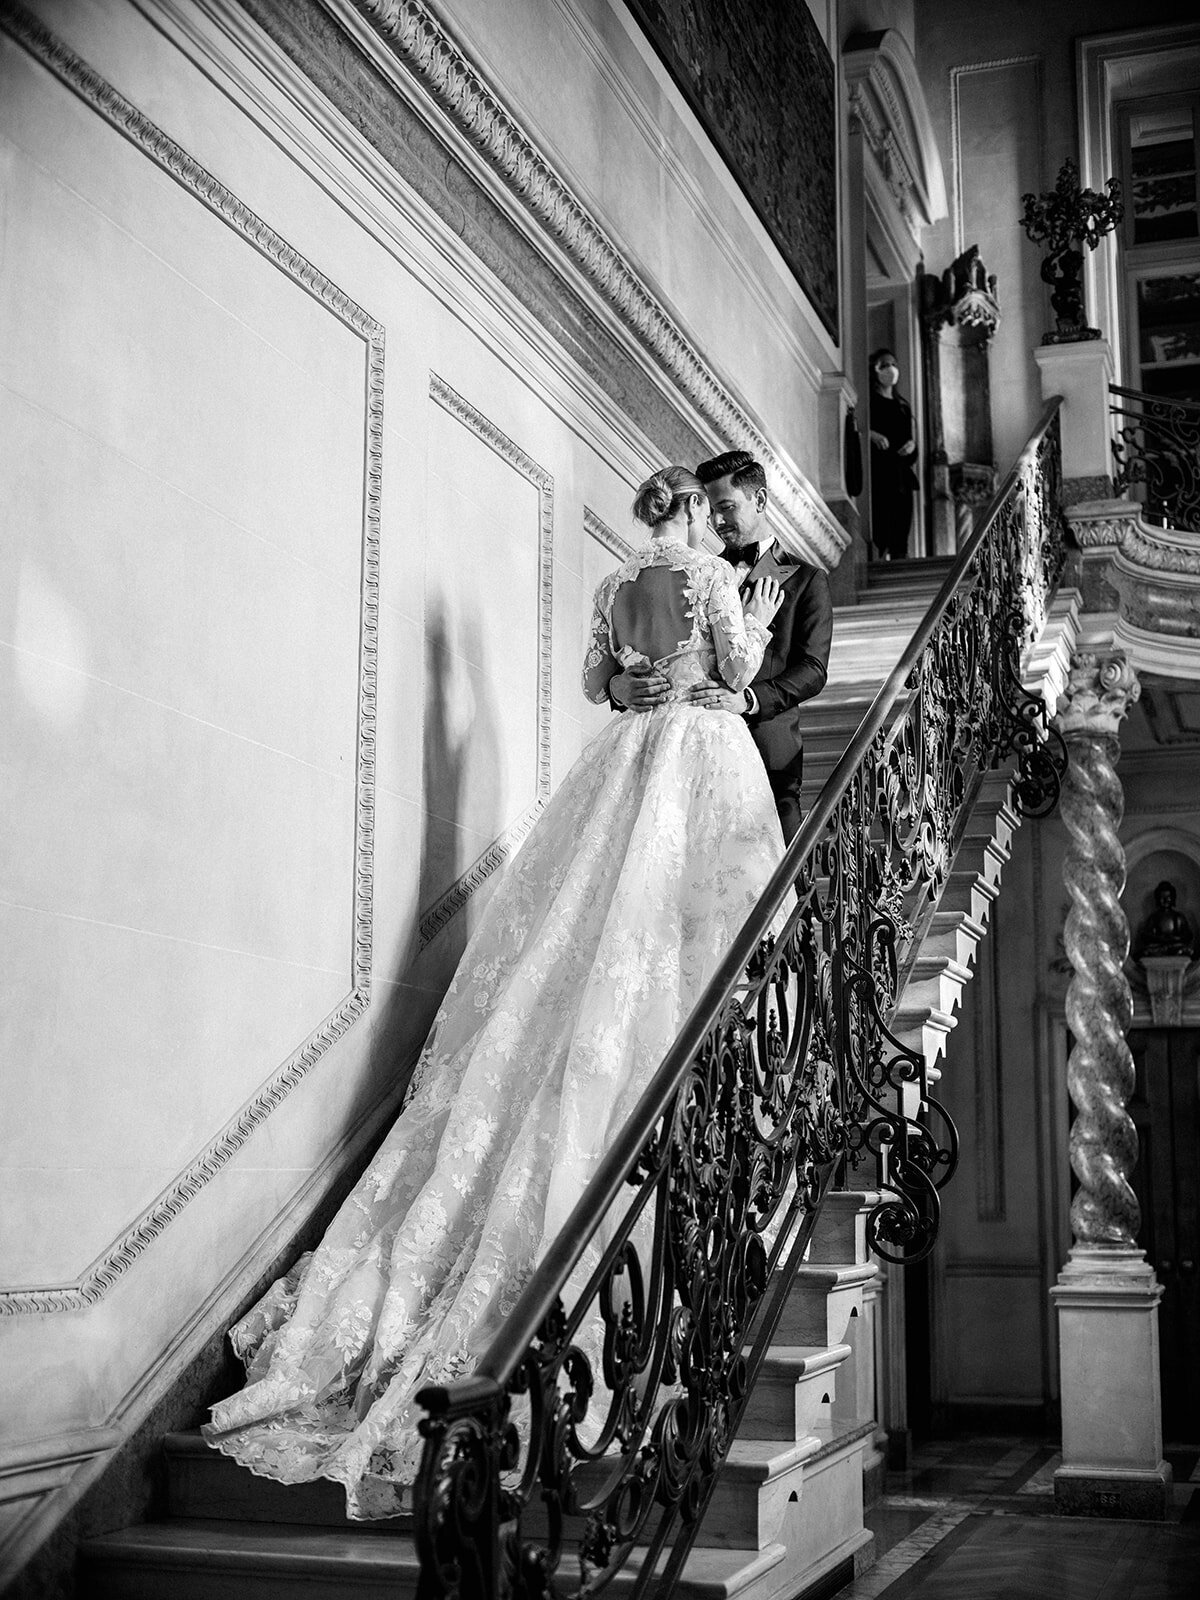 A black and white photo of bride and groom walking up the steps